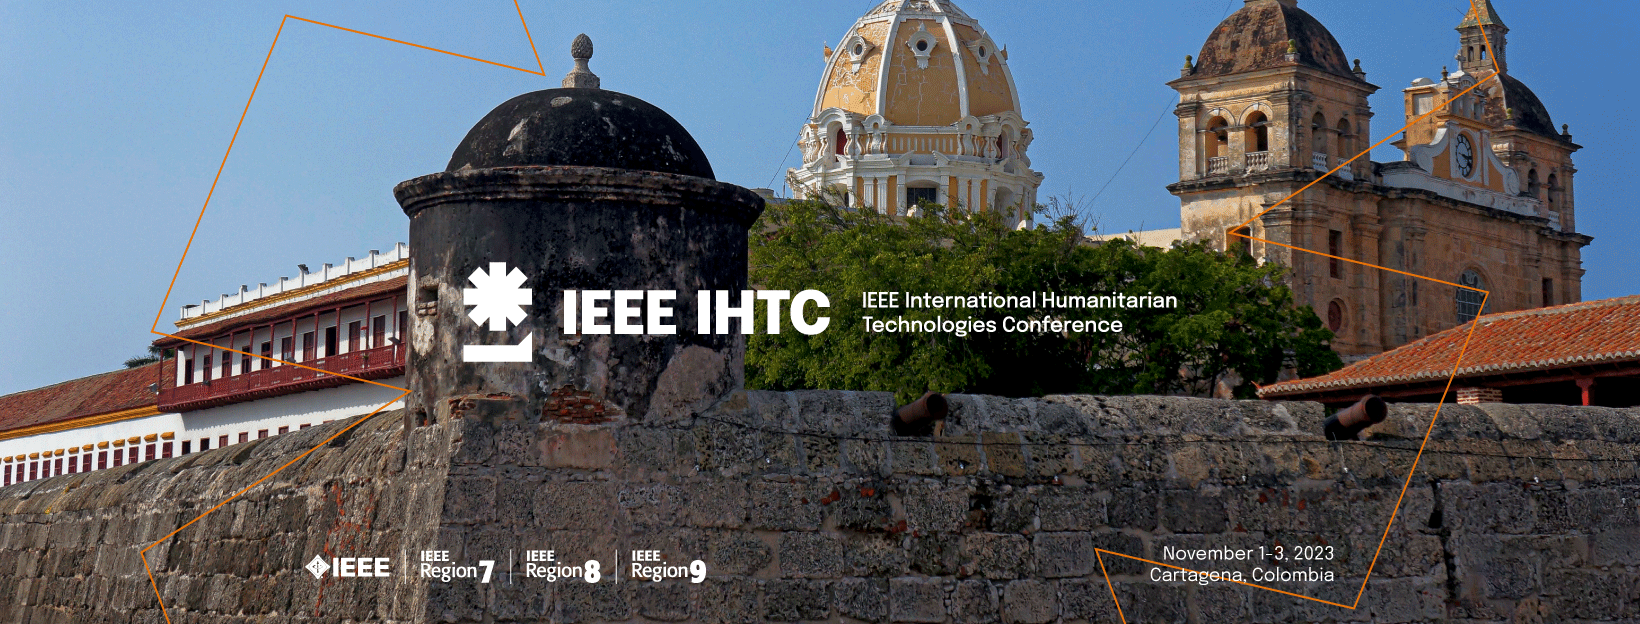 ieee_ihtc_cover_fb_1.png